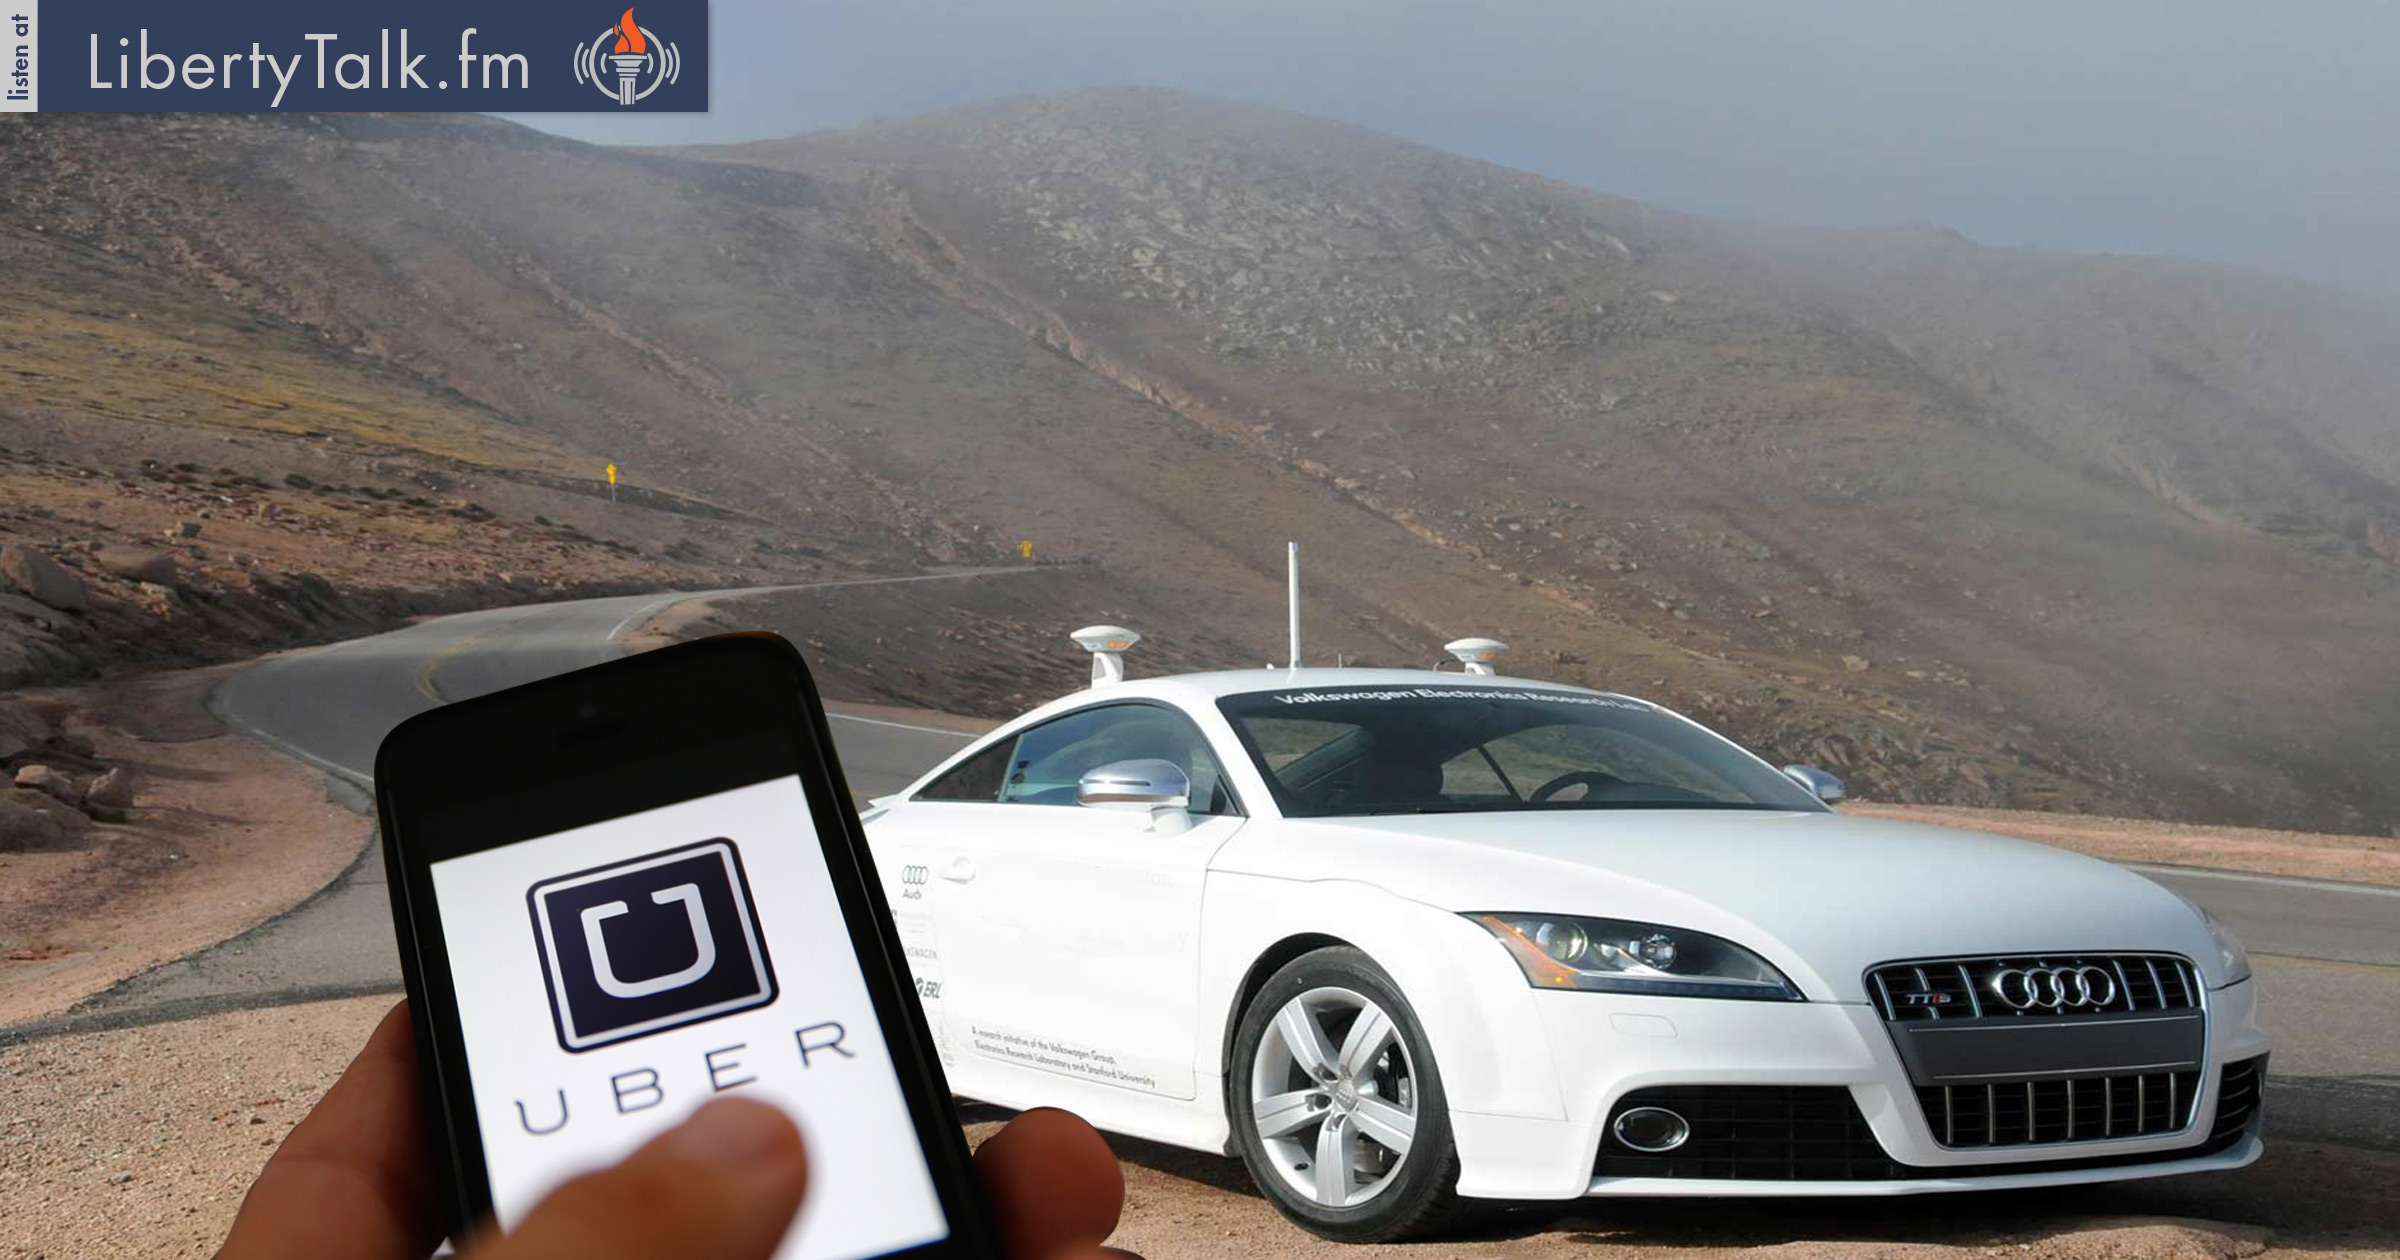 Will UBER Lead the Way in Driverless Car Technology?